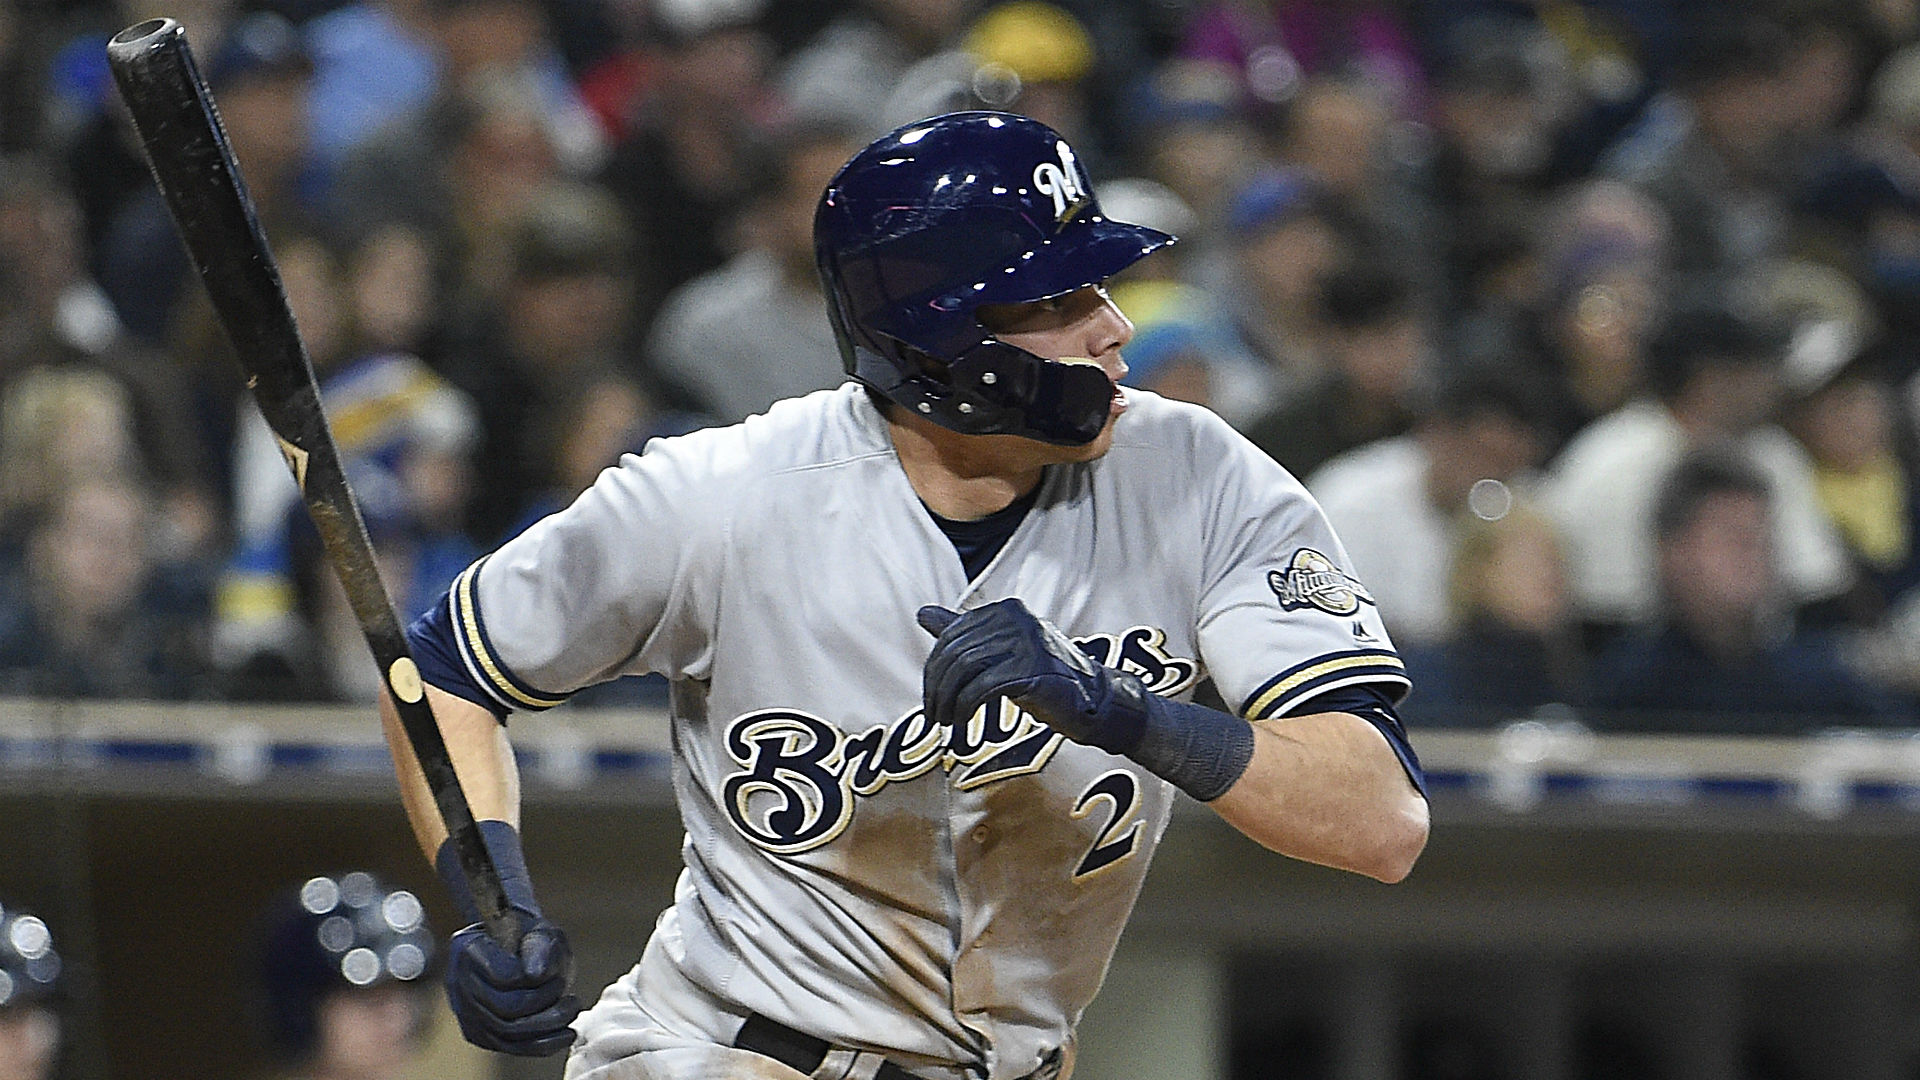 Christian Yelich injury news: Brewers place OF on 10-day DL | MLB